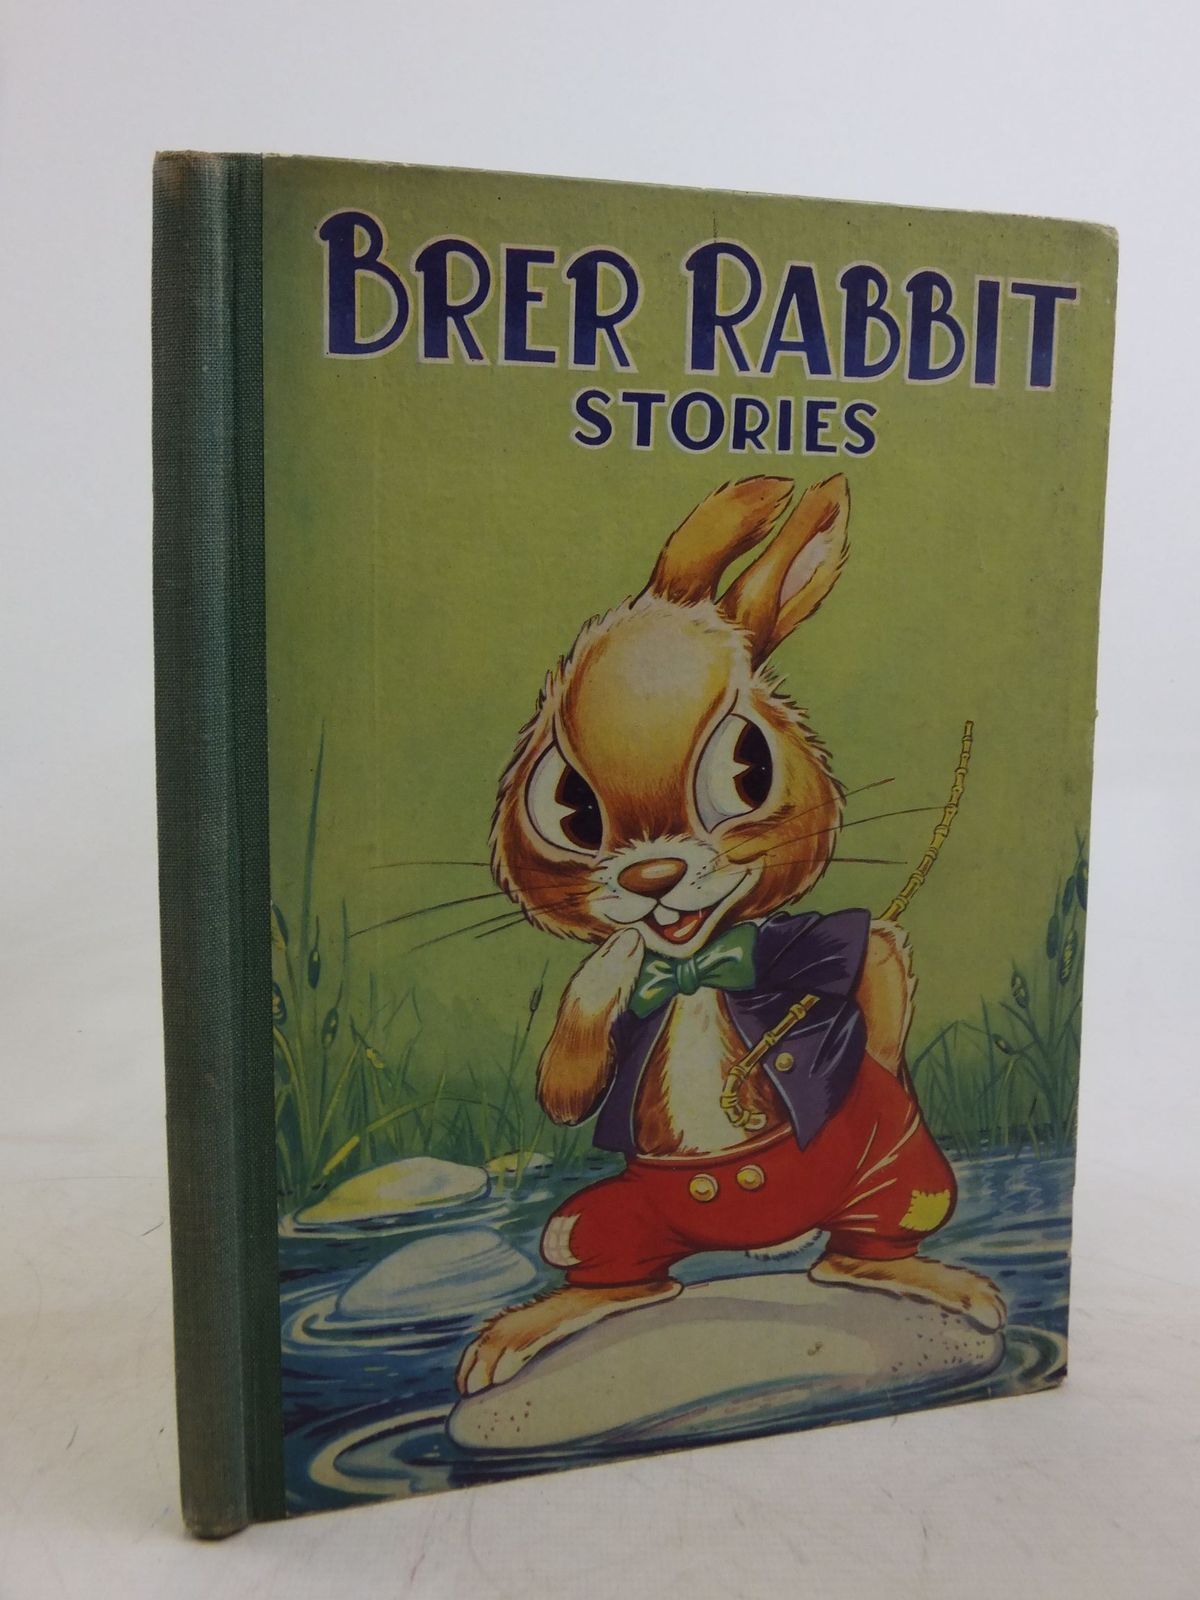 Photo of BRER RABBIT STORIES published by Birn Brothers Ltd. (STOCK CODE: 1712646)  for sale by Stella & Rose's Books